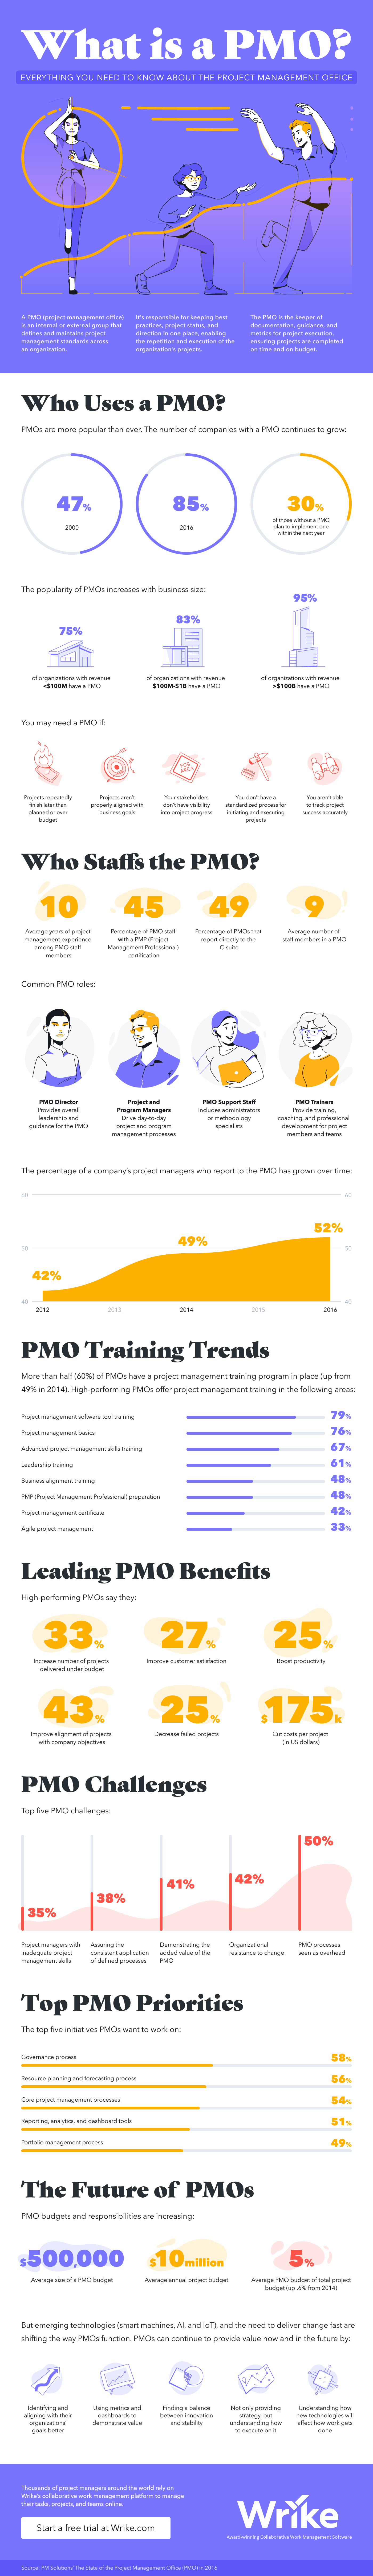 What is a PMO?